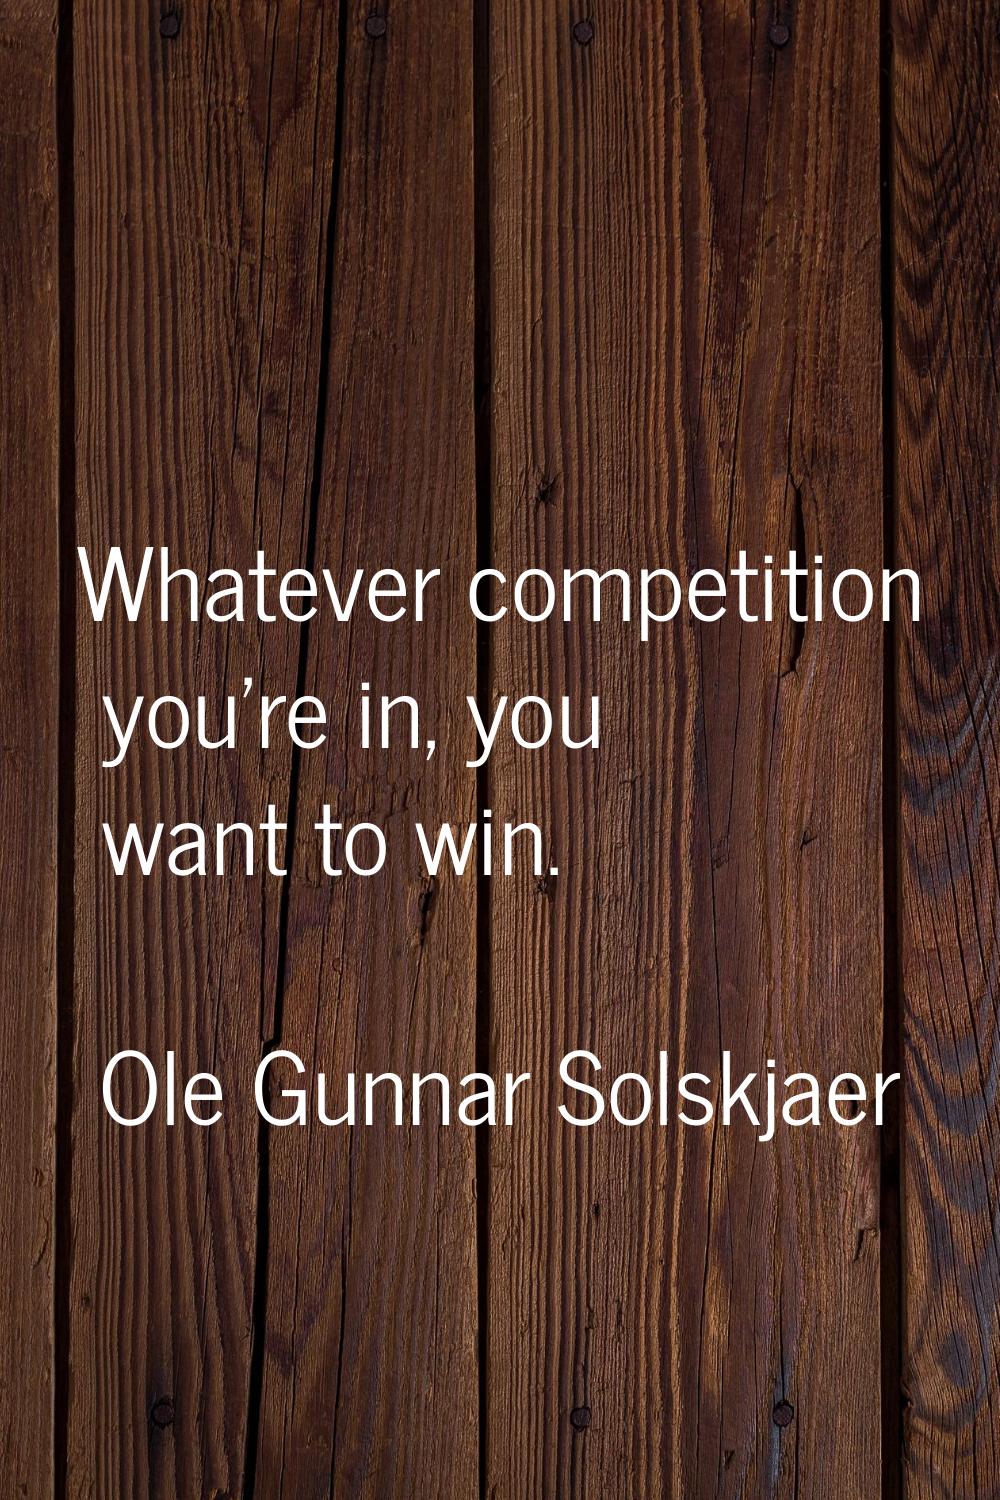 Whatever competition you're in, you want to win.